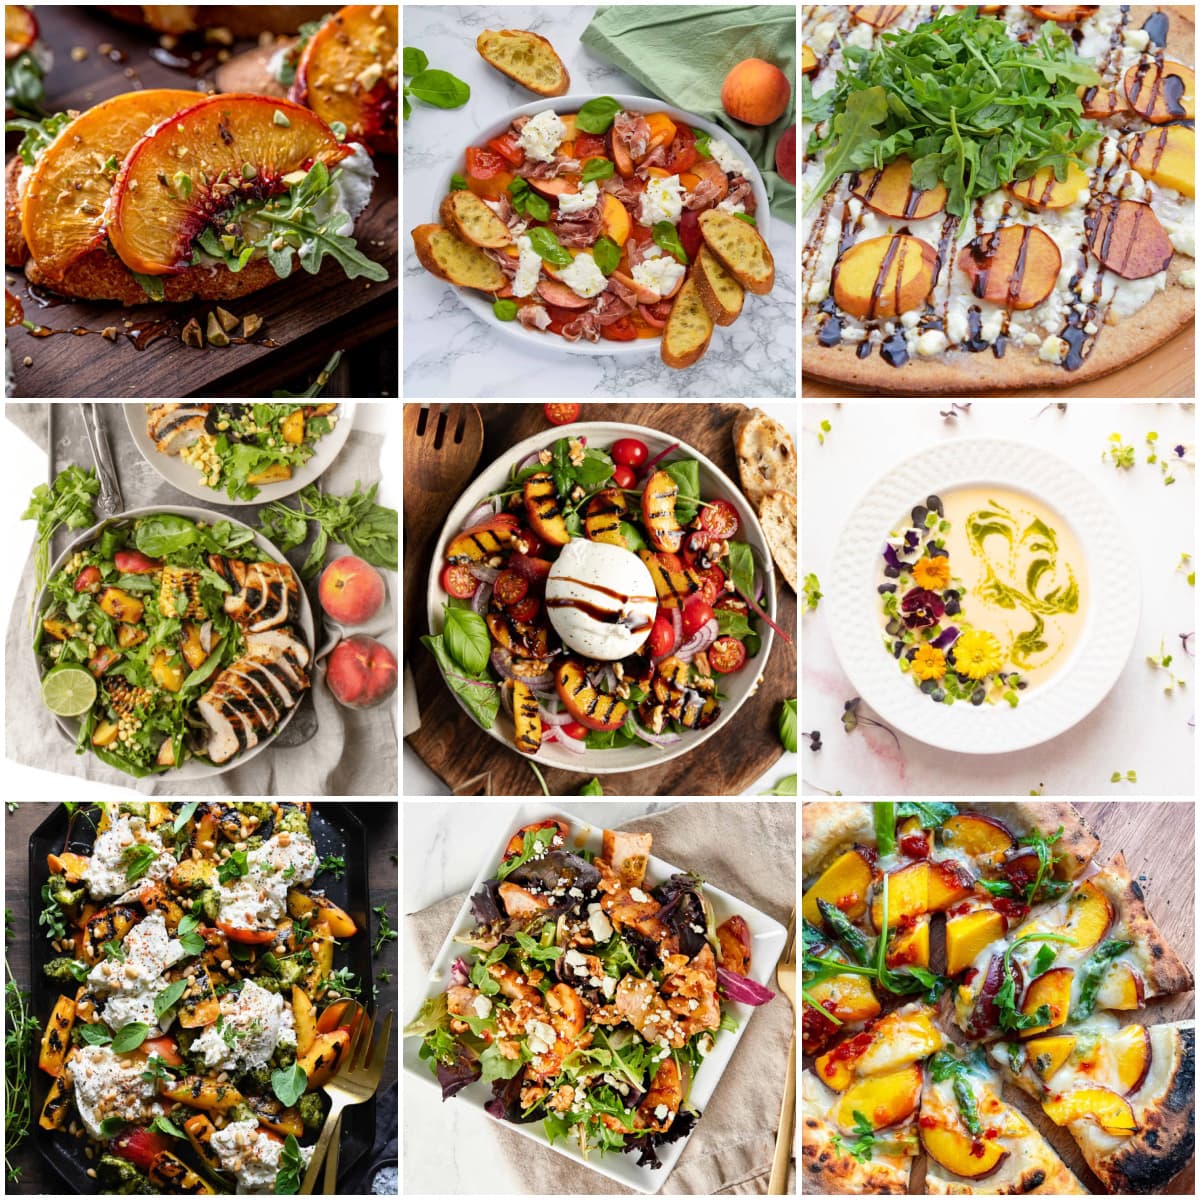 9-panel collage of various savory peach dishes, including salads, soup, pizza, and appetizers. 